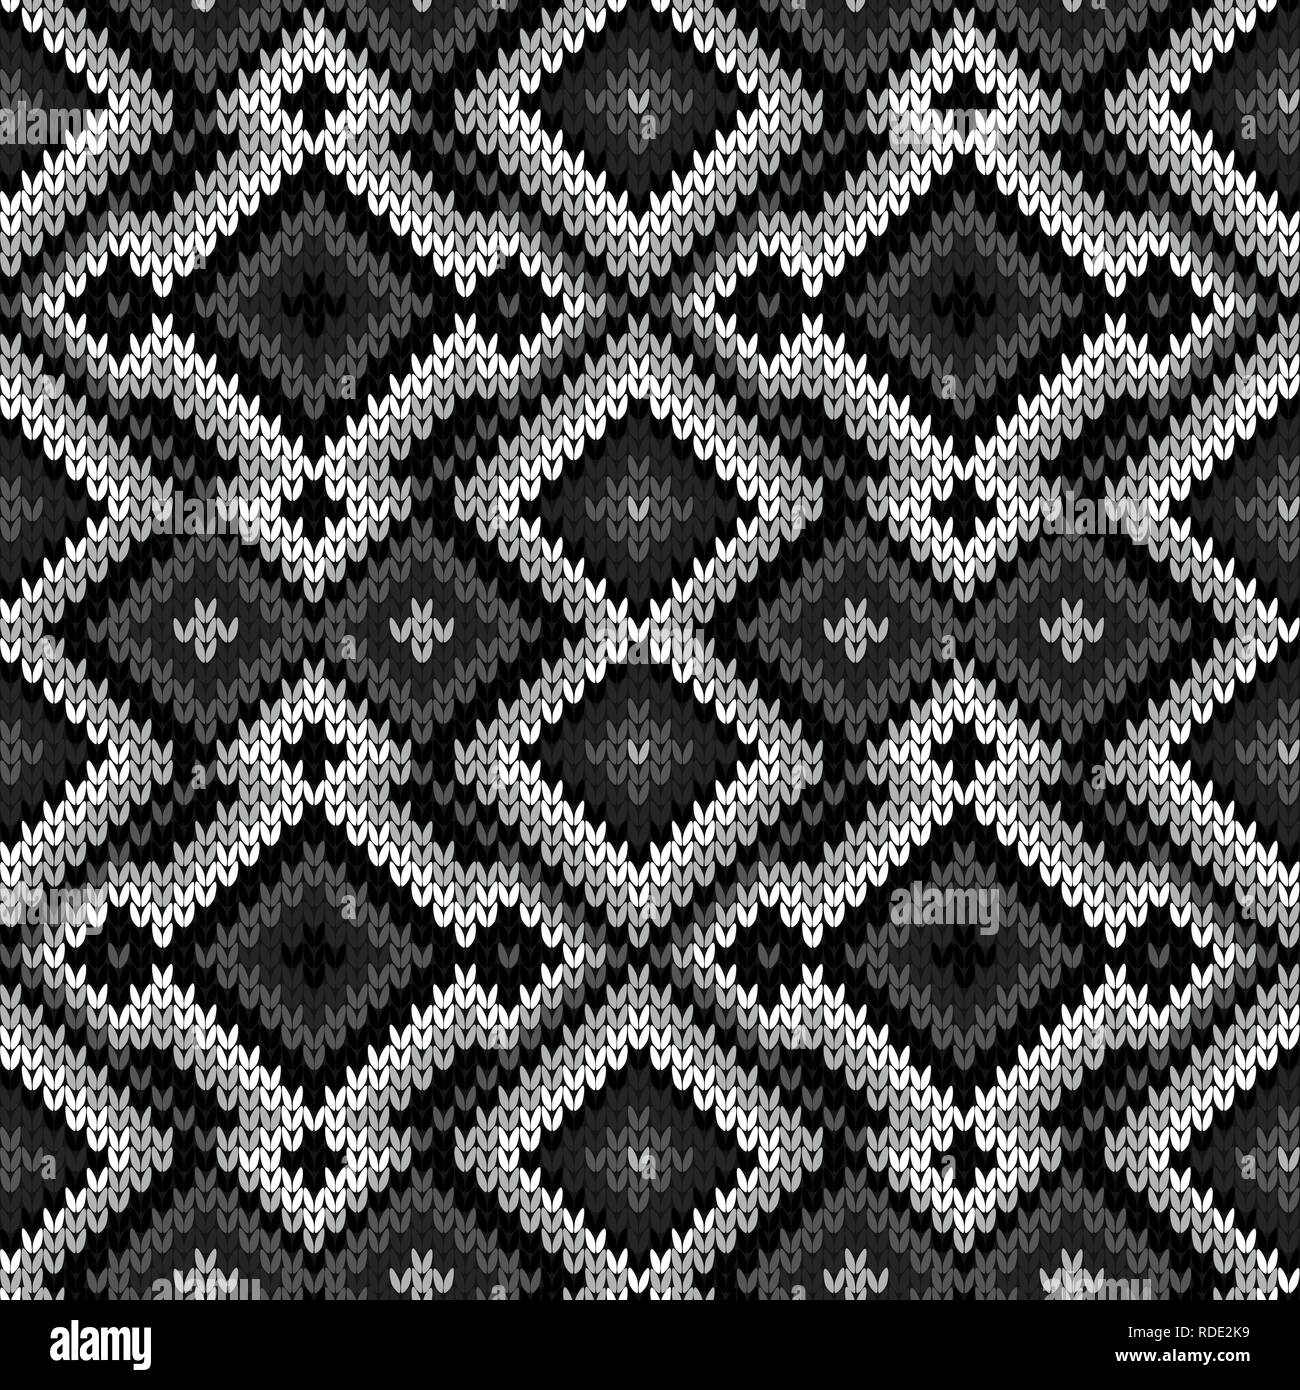 Knitted seamless ornate pattern with interlacing lines in monochrome ...